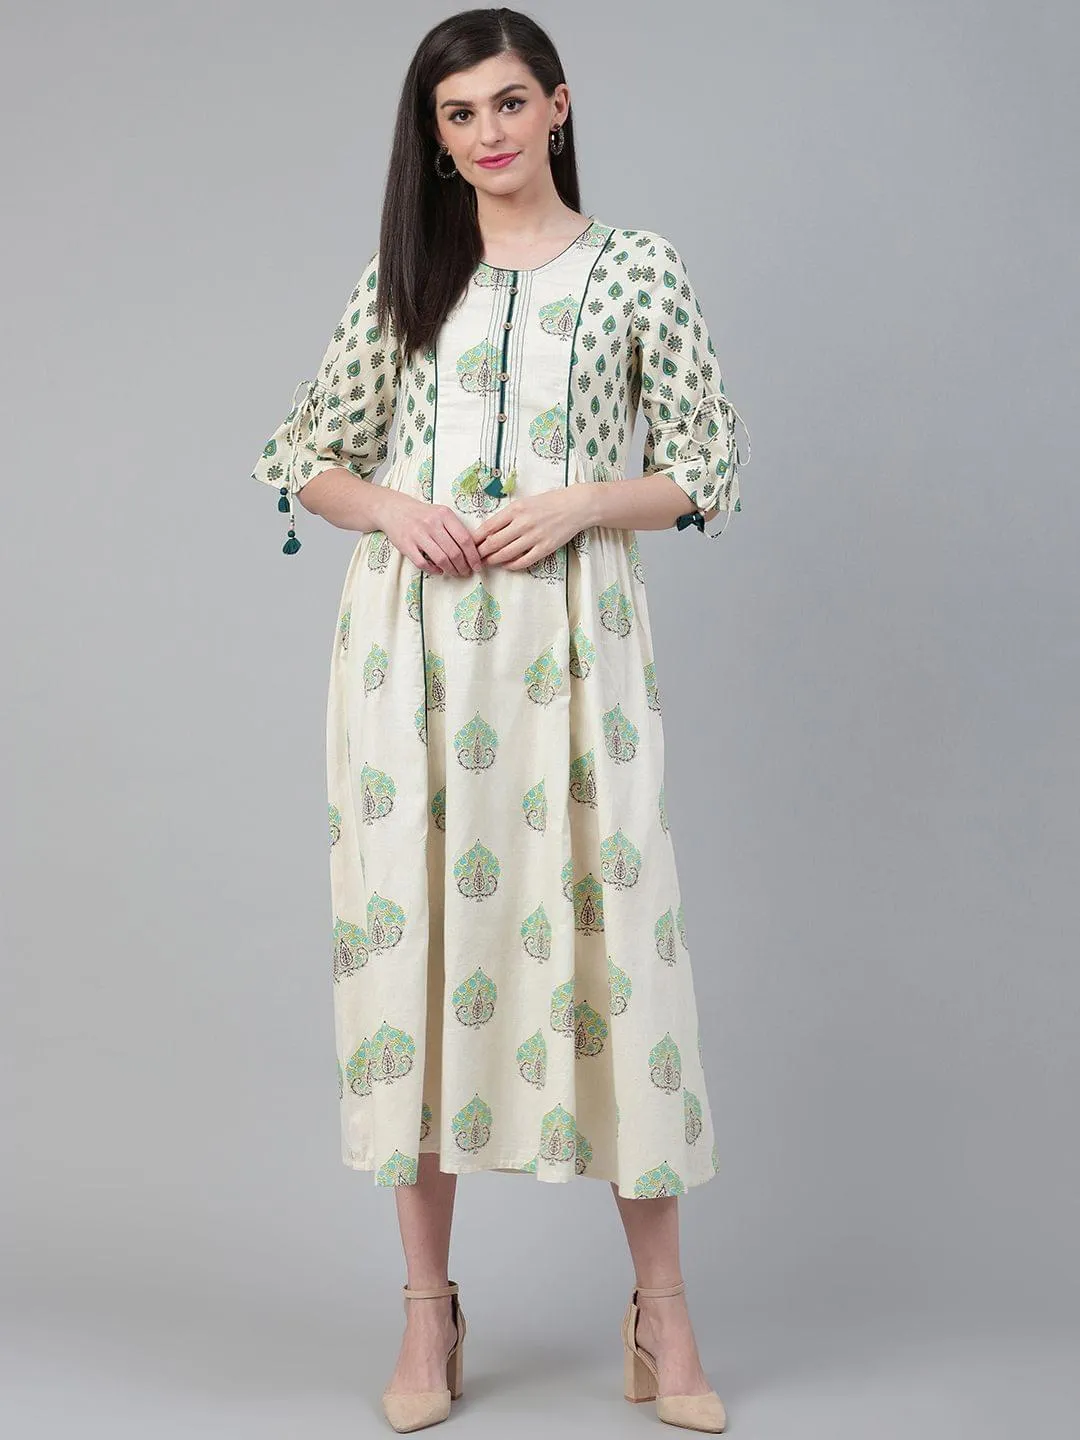 Cotton Printed Dress Front